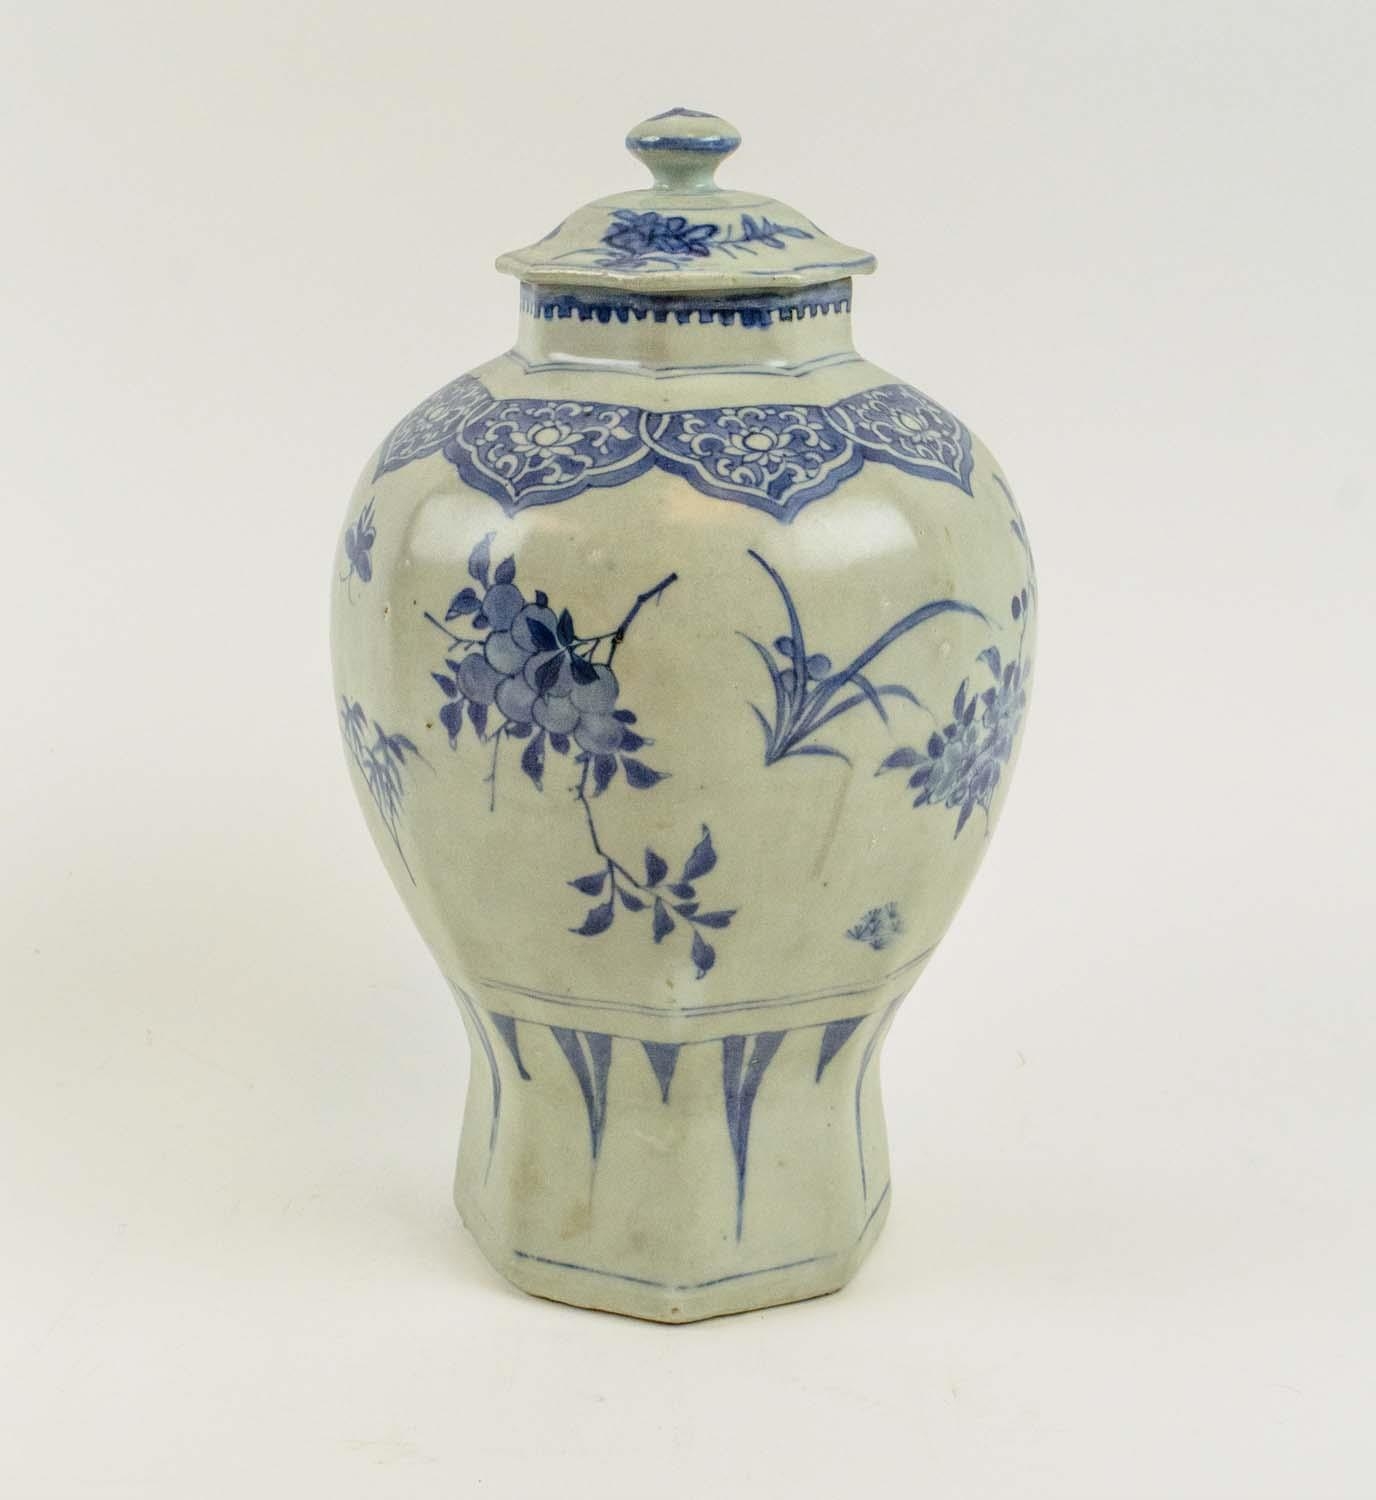 TRANSITIONAL 'HATCHER CARGO' OCTAGONAL BLUE AND WHITE BALUSTER VASE, circa 1640, with lid, decorated